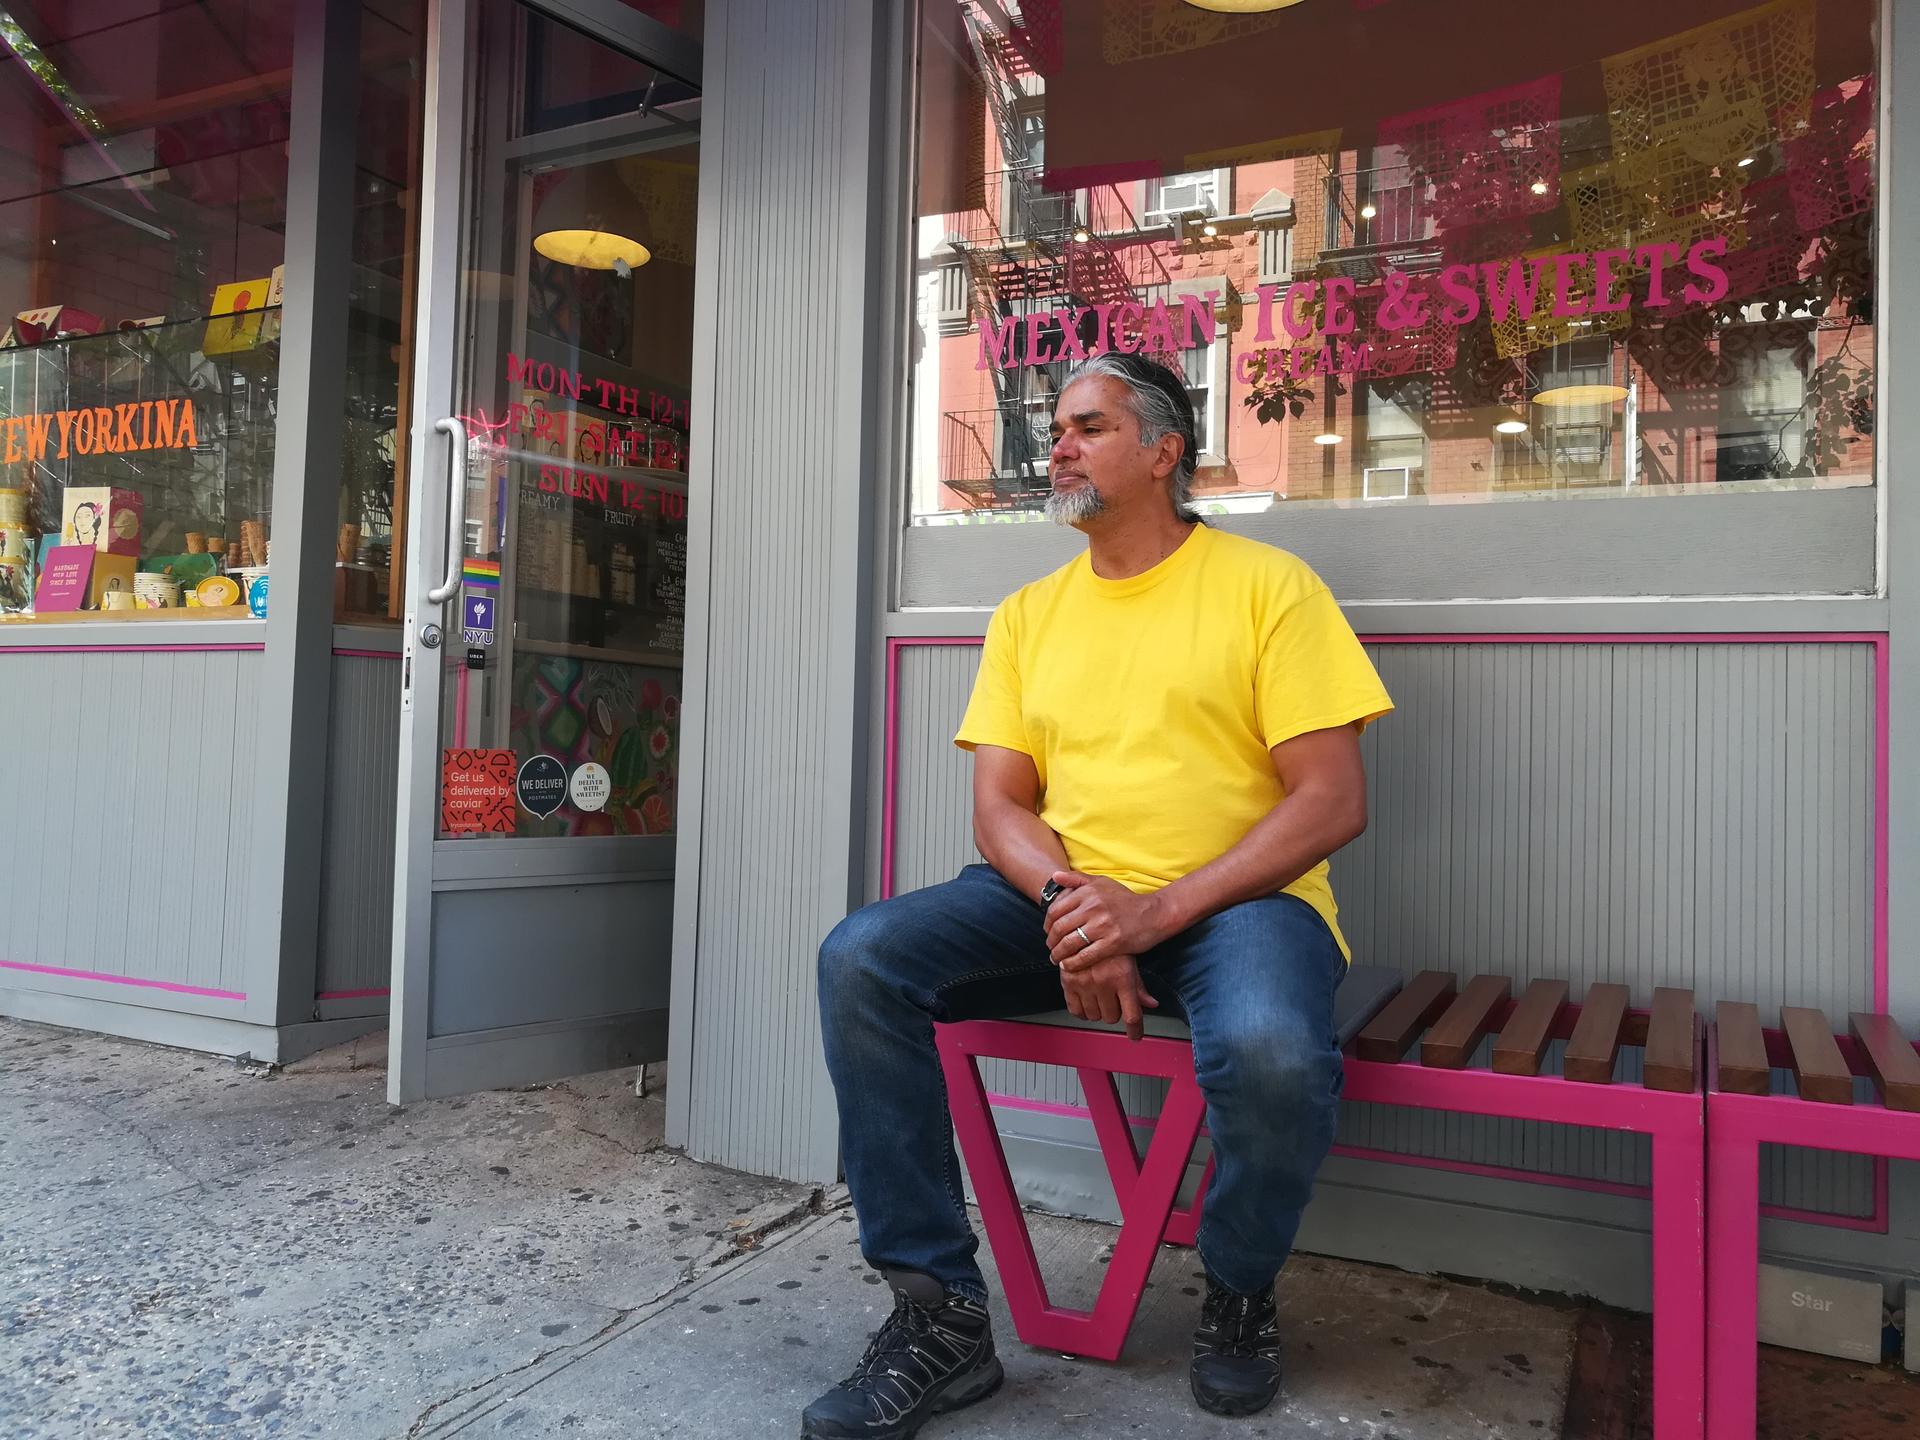 Man sitting on bench in front of sweets shop, looking off camera